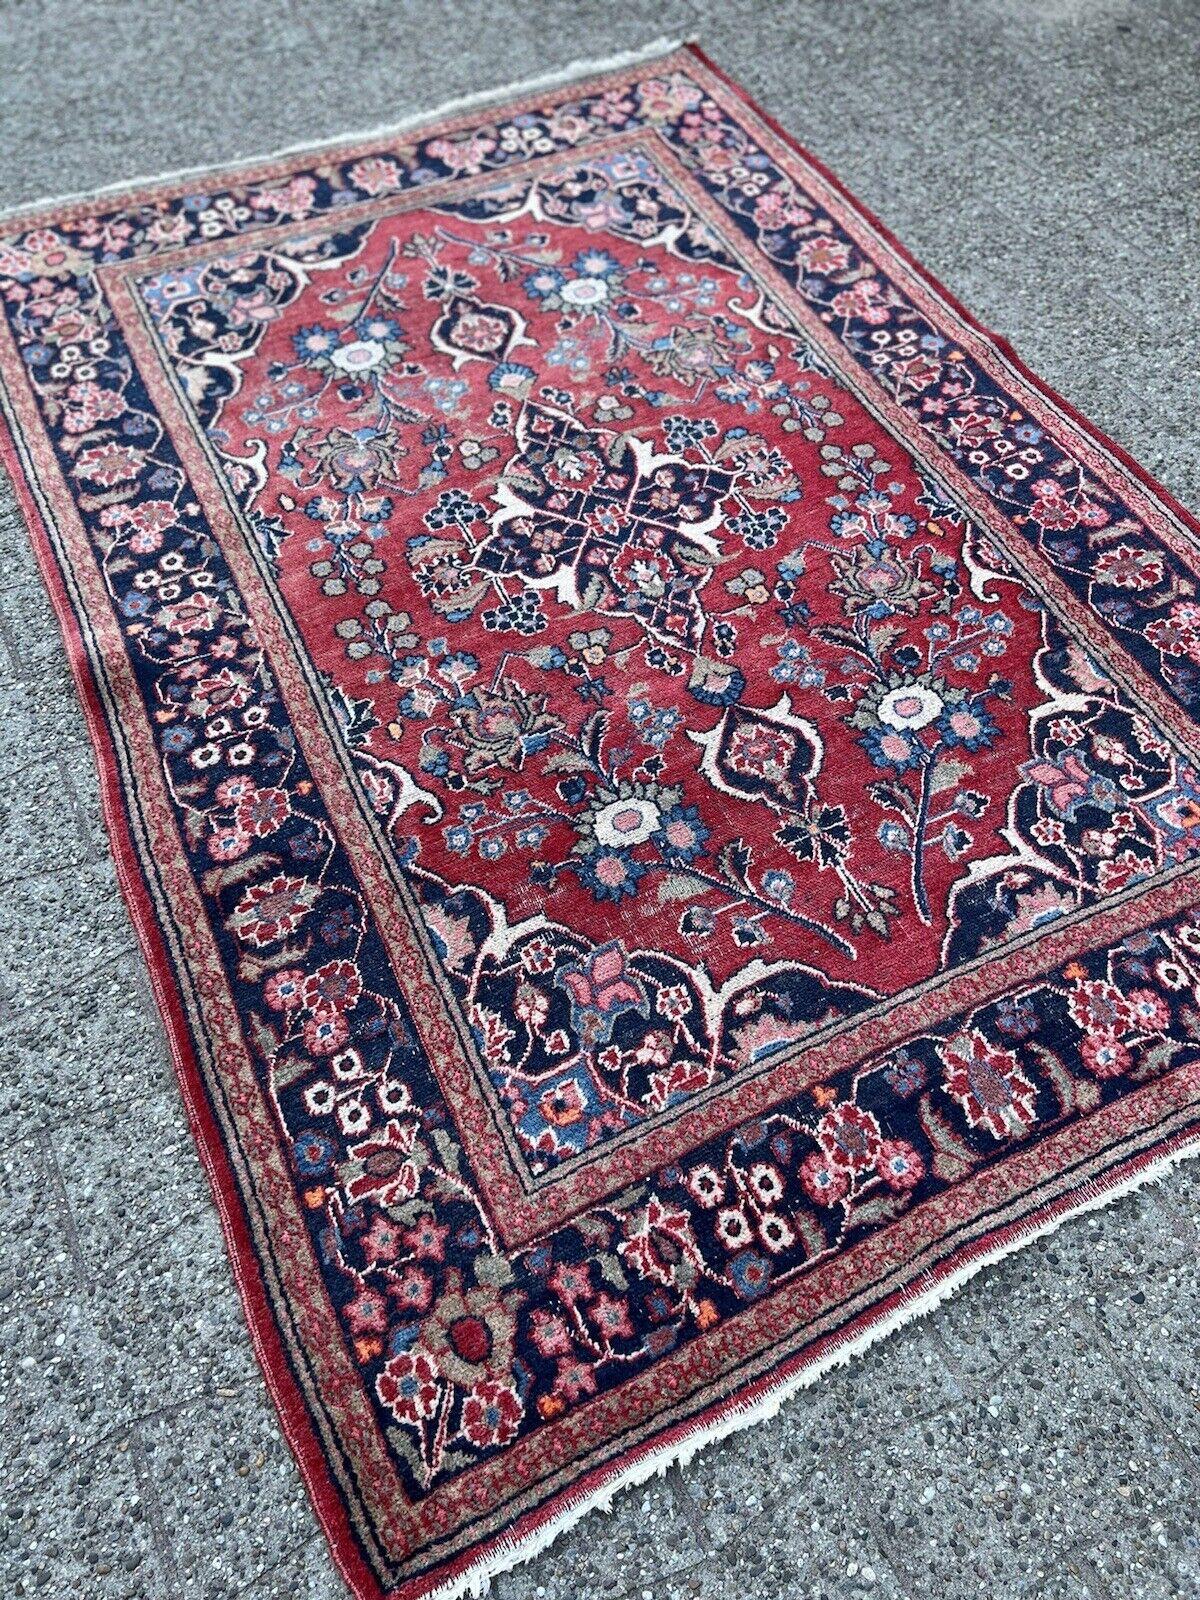 Wool Handmade Antique Persian Style Kashan Rug 4.4' x 6.5', 1920s - 1S43 For Sale